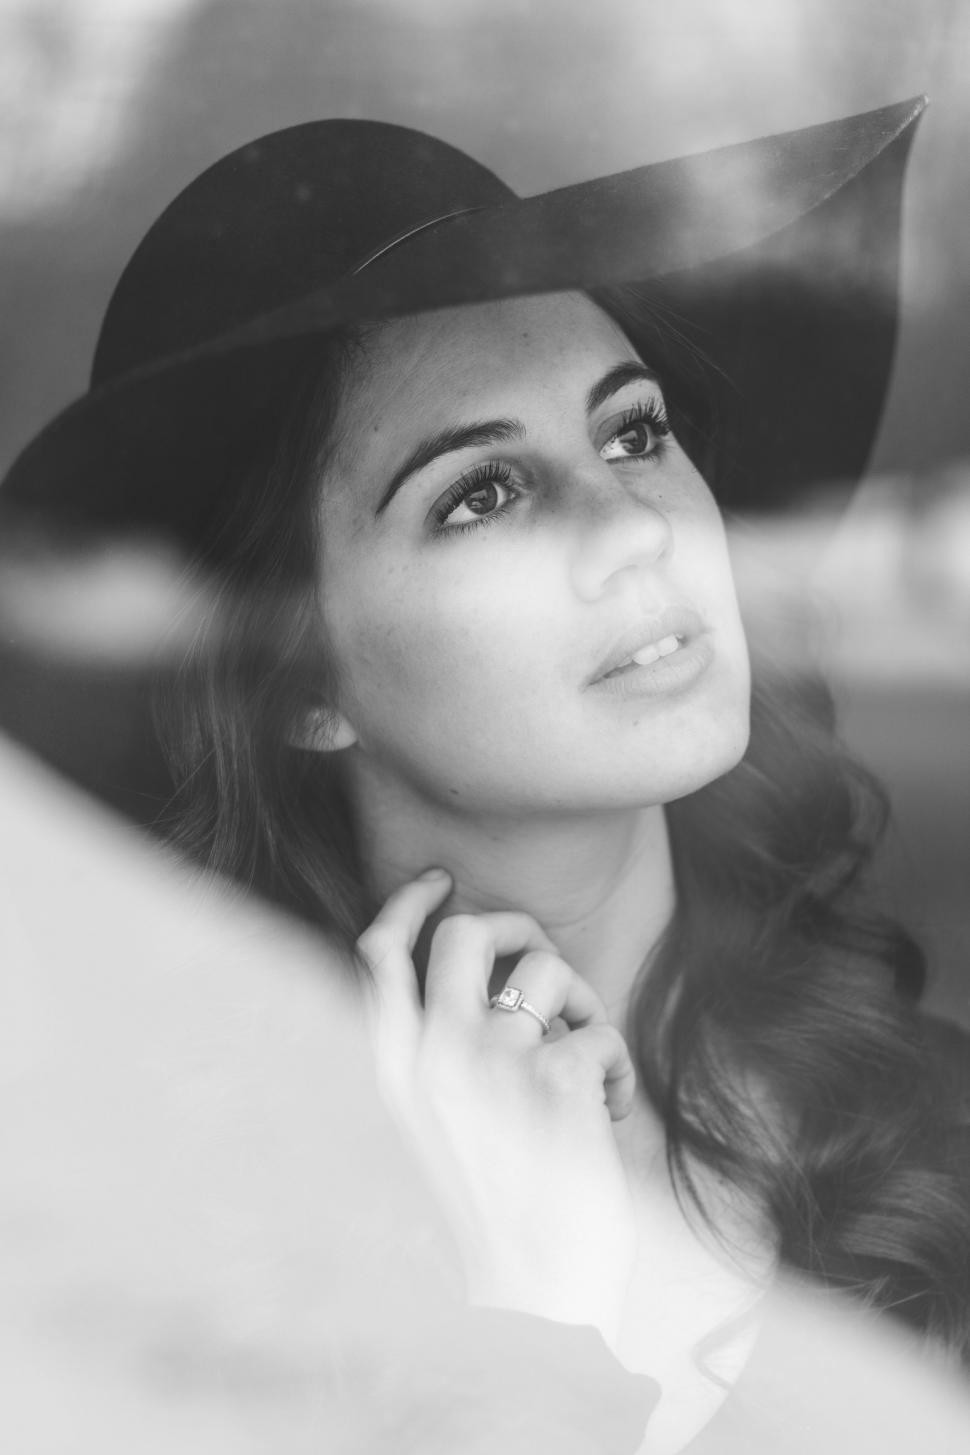 Free Image of Woman in Hat Black and White 